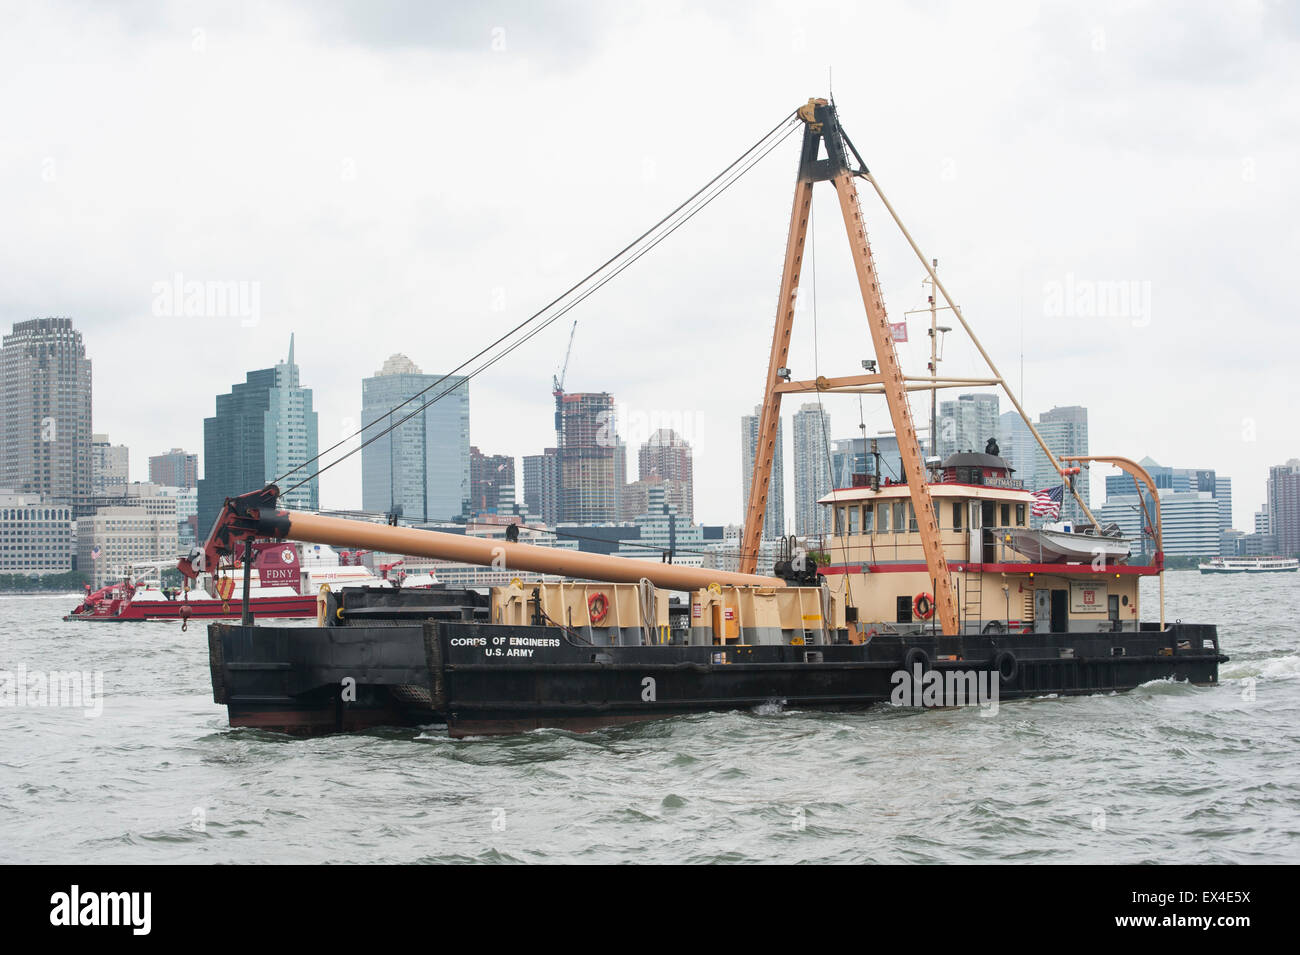 The Driftmaster, a boat belonging to the U.S. Army Corps of Engineers on the Hudson River, where it picks up debris. Stock Photo